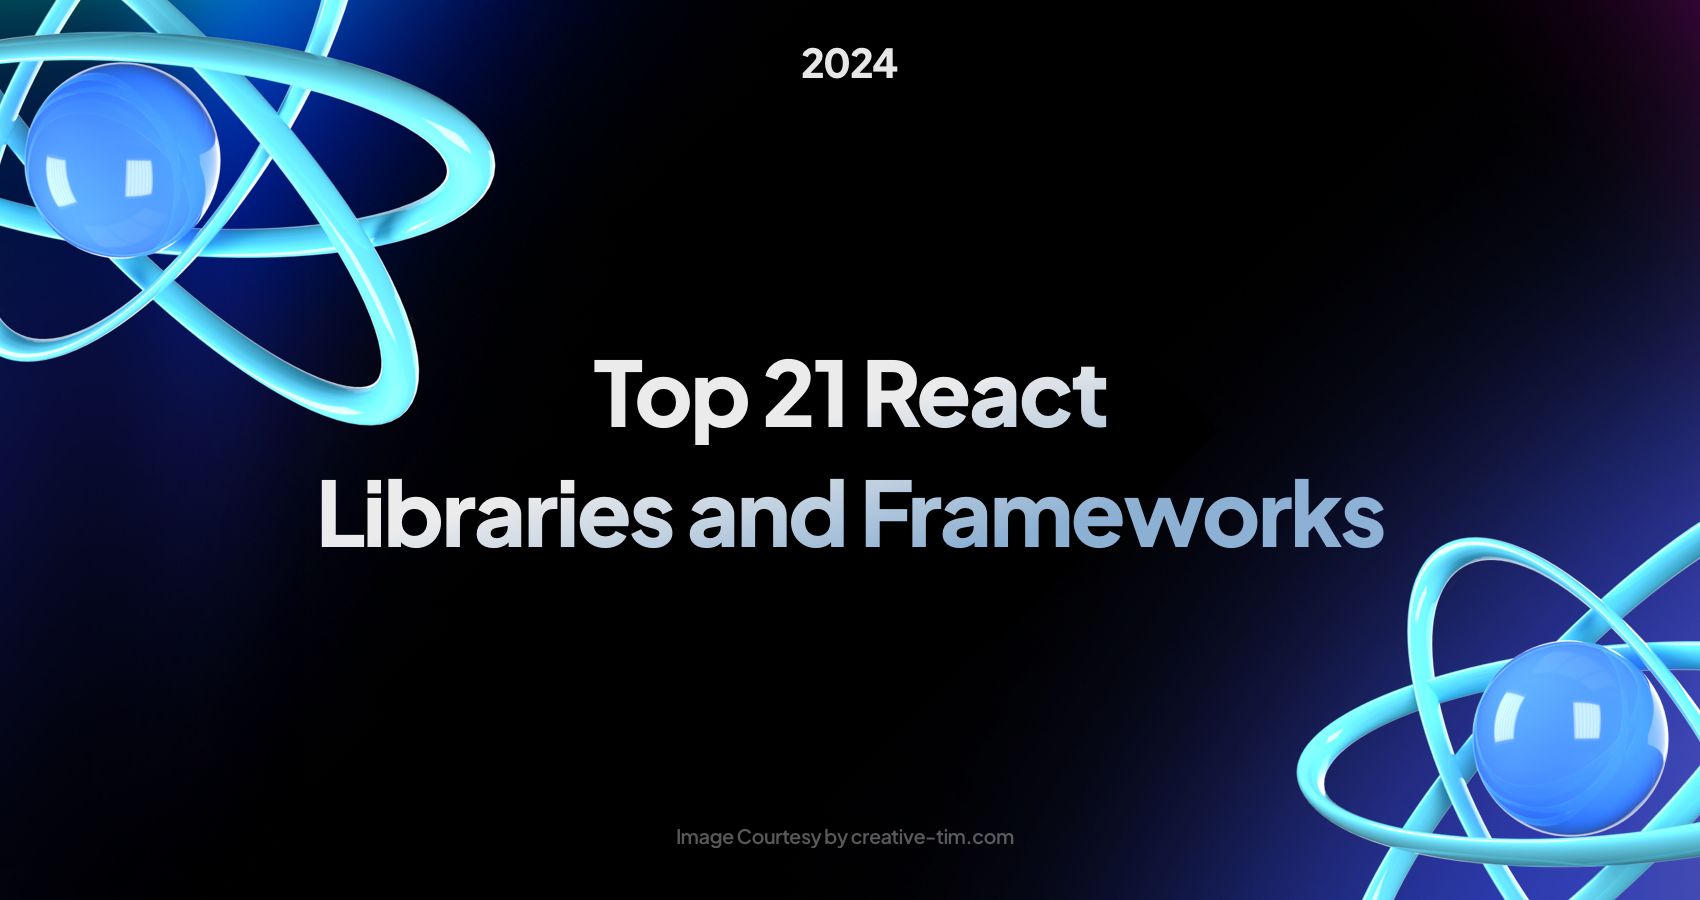 Top 21 React Libraries and Frameworks to Watch in 2024